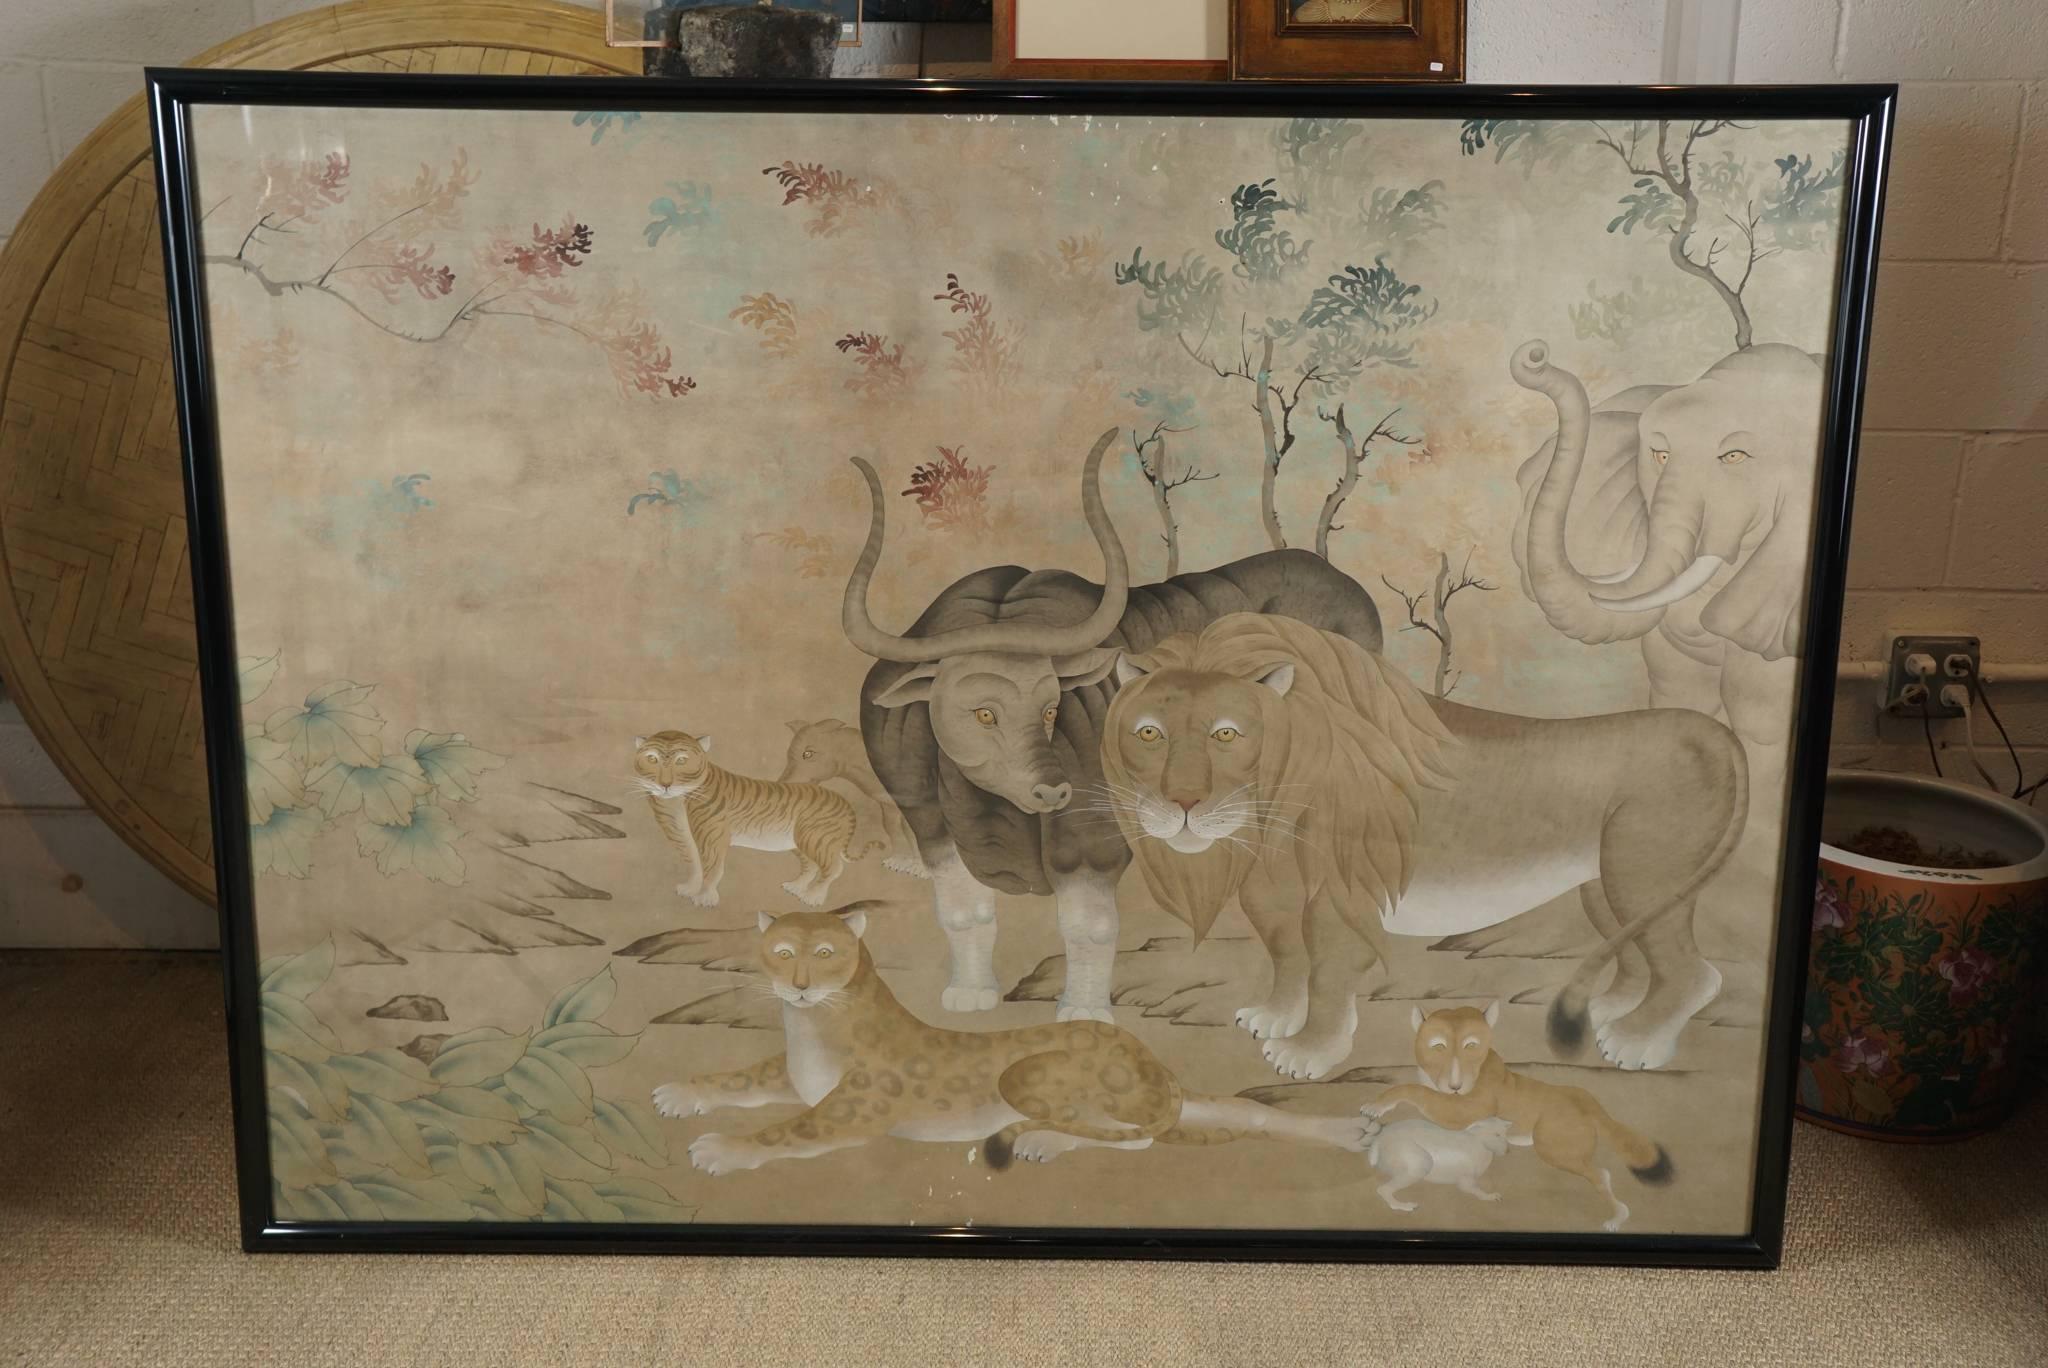 Here is a beautiful 20th century wallpaper panel in the style of The Peaceable Kingdom.